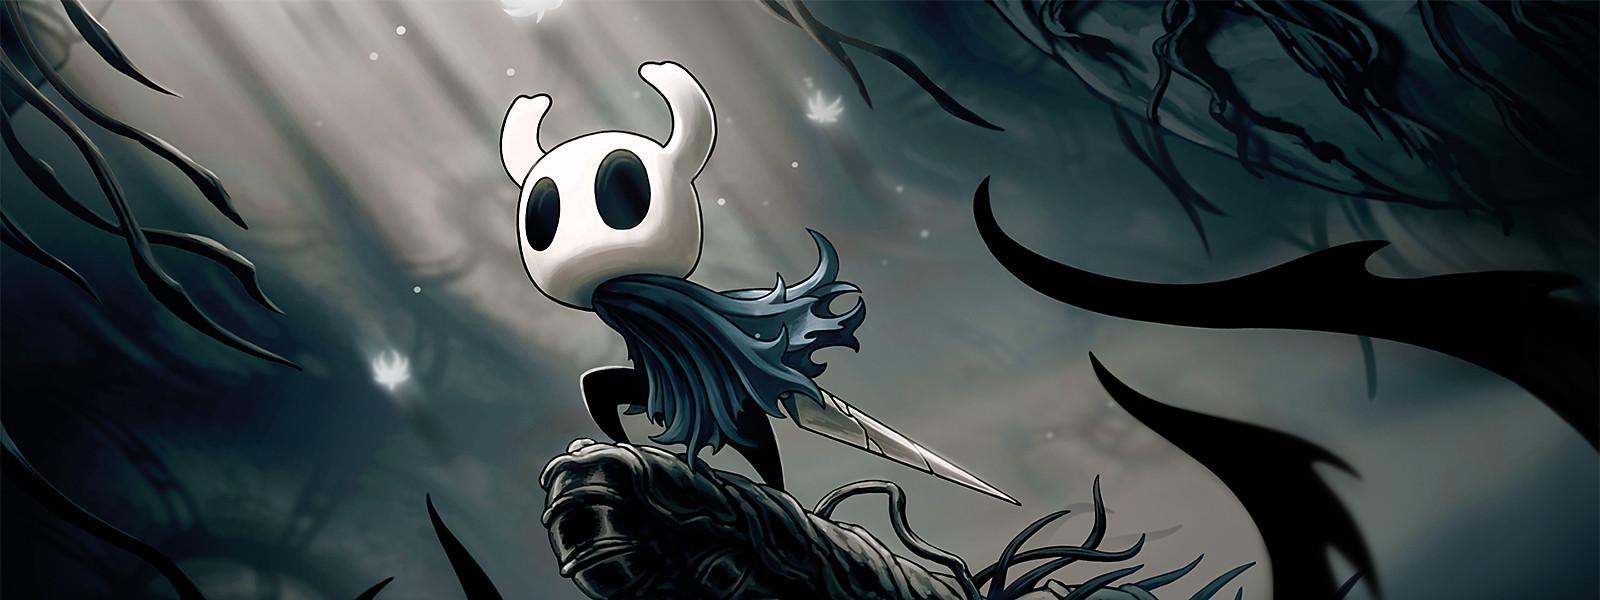 Hollow Knight: Voidheart Edition Game